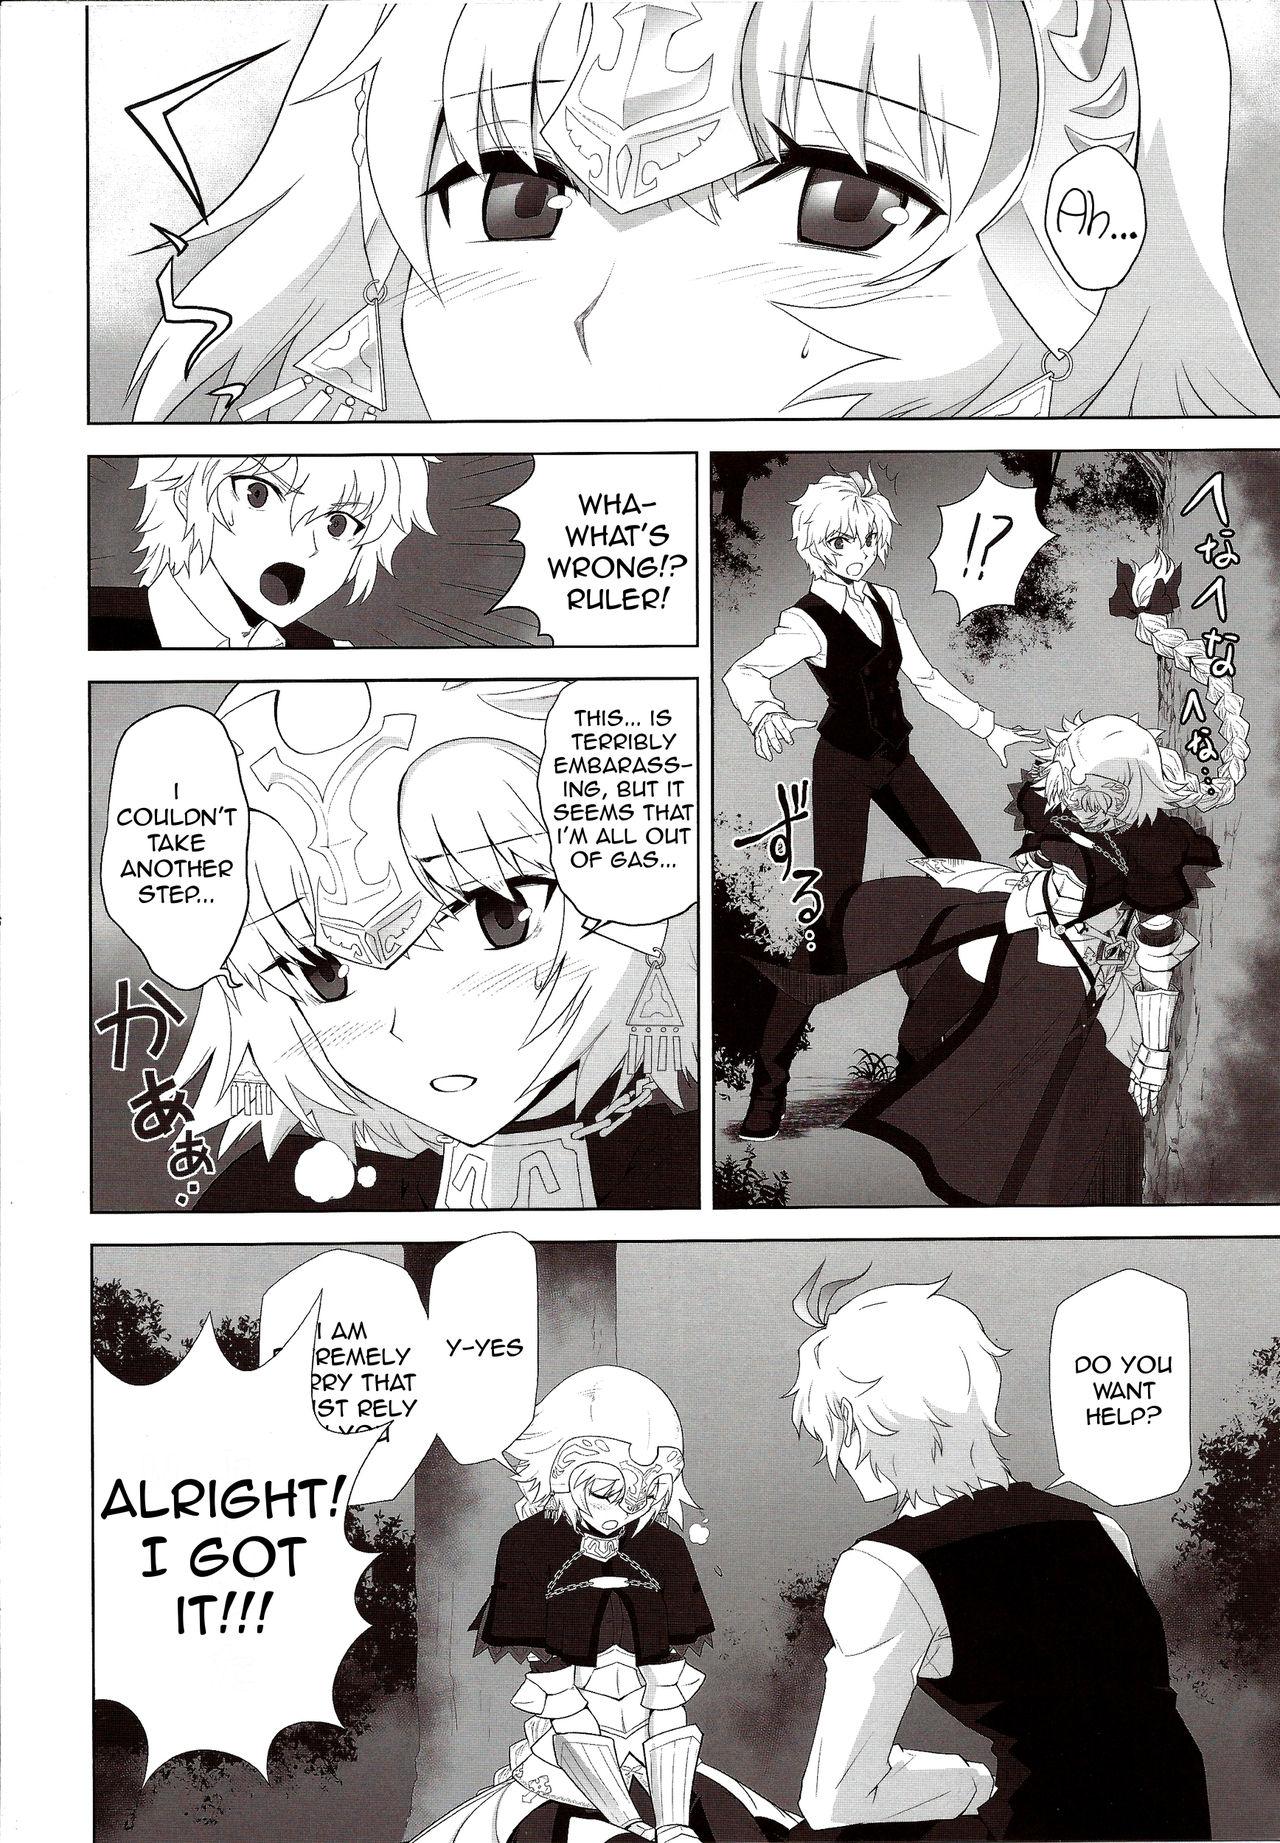 Collar T-MOON COMPLEX APO02 - Fate apocrypha Sixtynine - Page 6